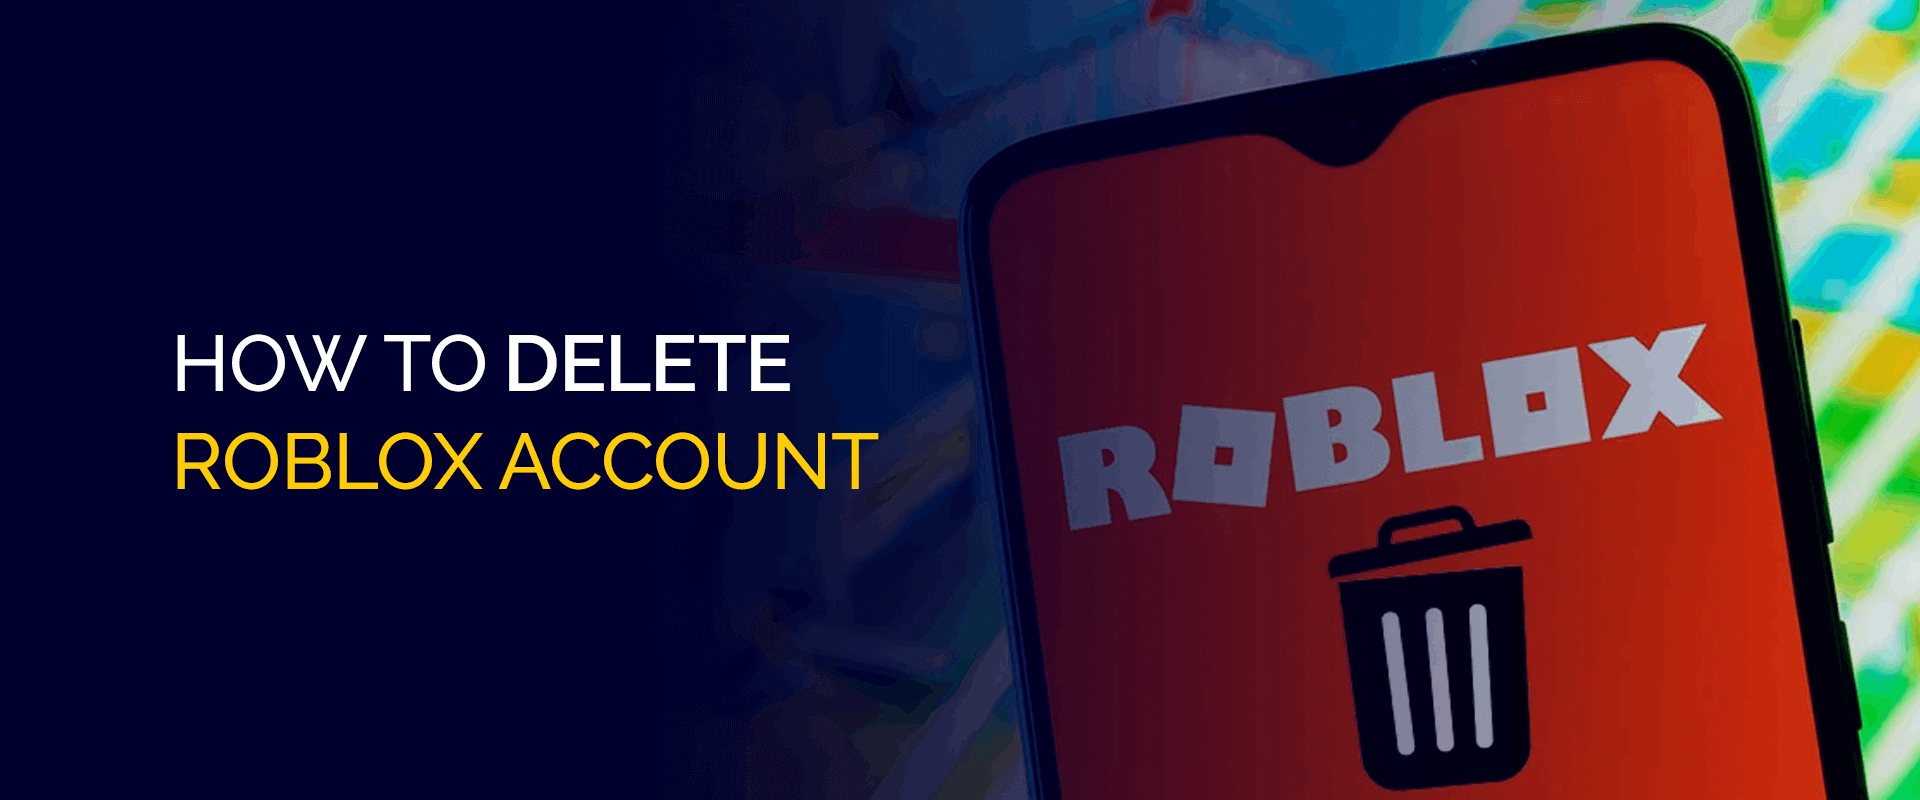 A Step-by-Step Guide on How to Delete Your Roblox Account